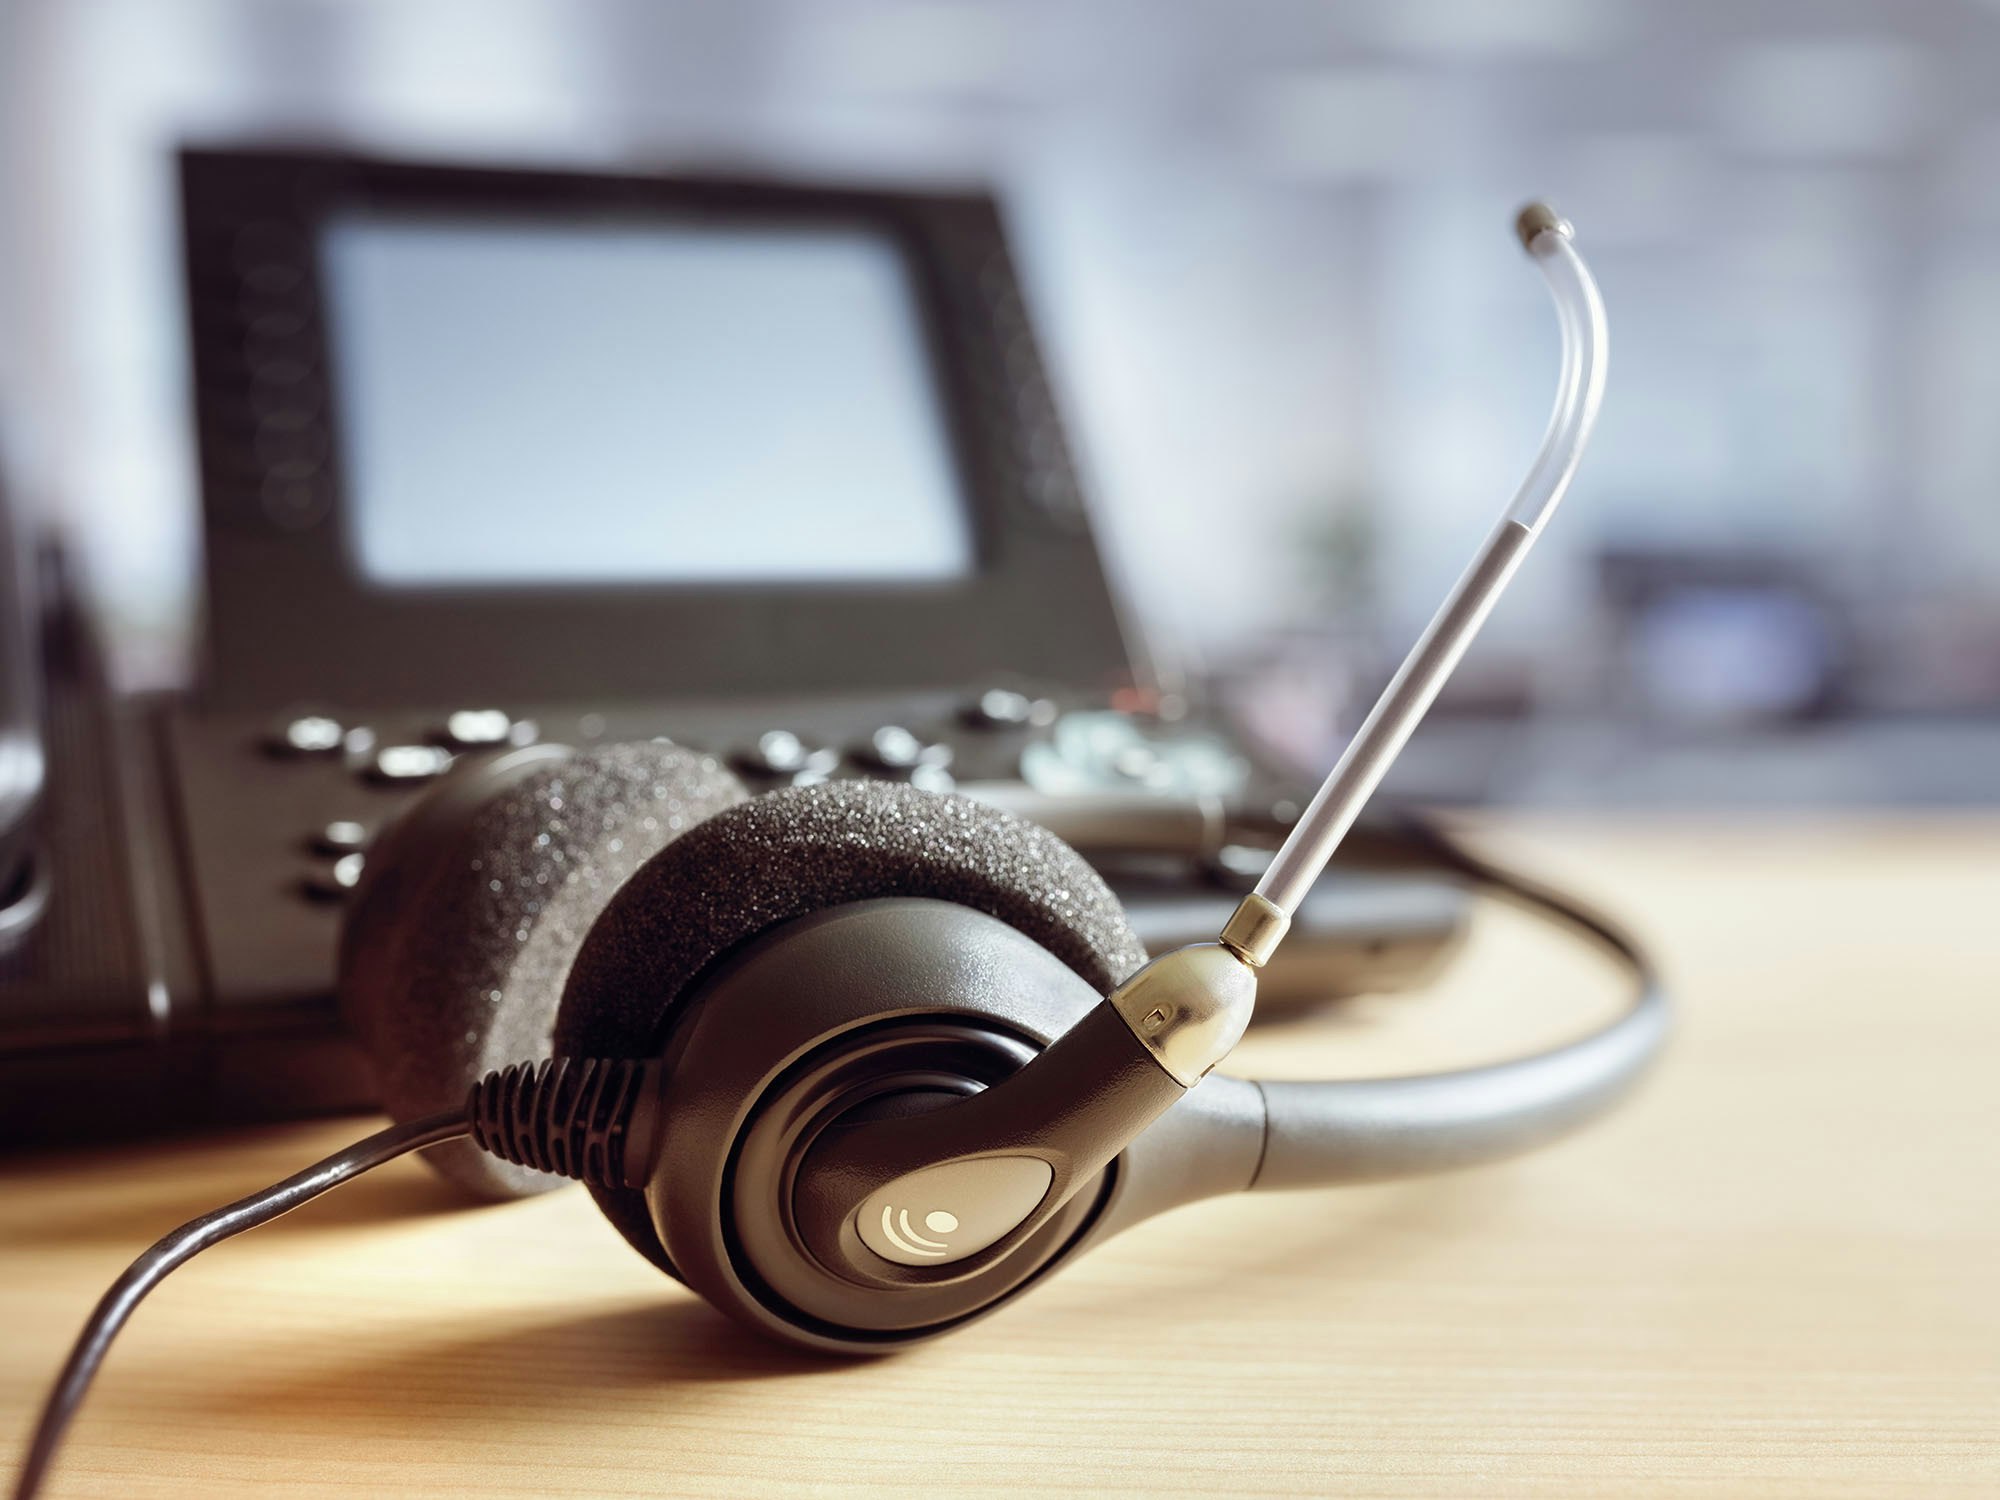 <p>Serco Citizens Services Pty Ltd (Serco) will operate the NDIA call centre out of Melbourne and regional Victoria over the next two years, commencing next month. [Source: Shutterstock]</p>
